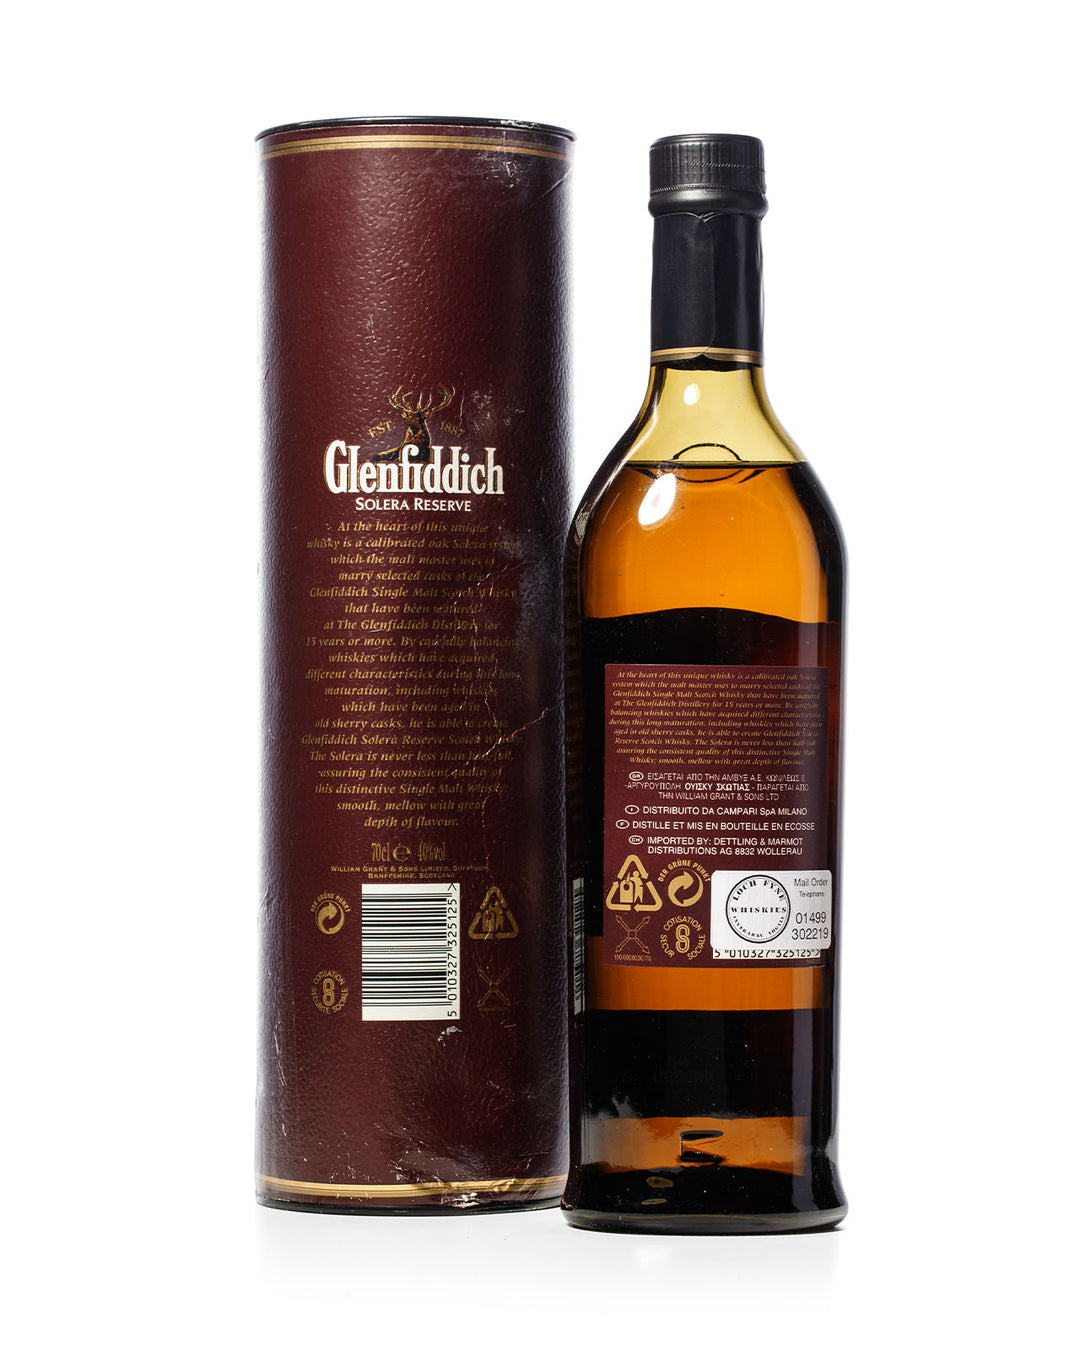 Glenfiddich 15 Year Old Solera Reserve With Original Tube